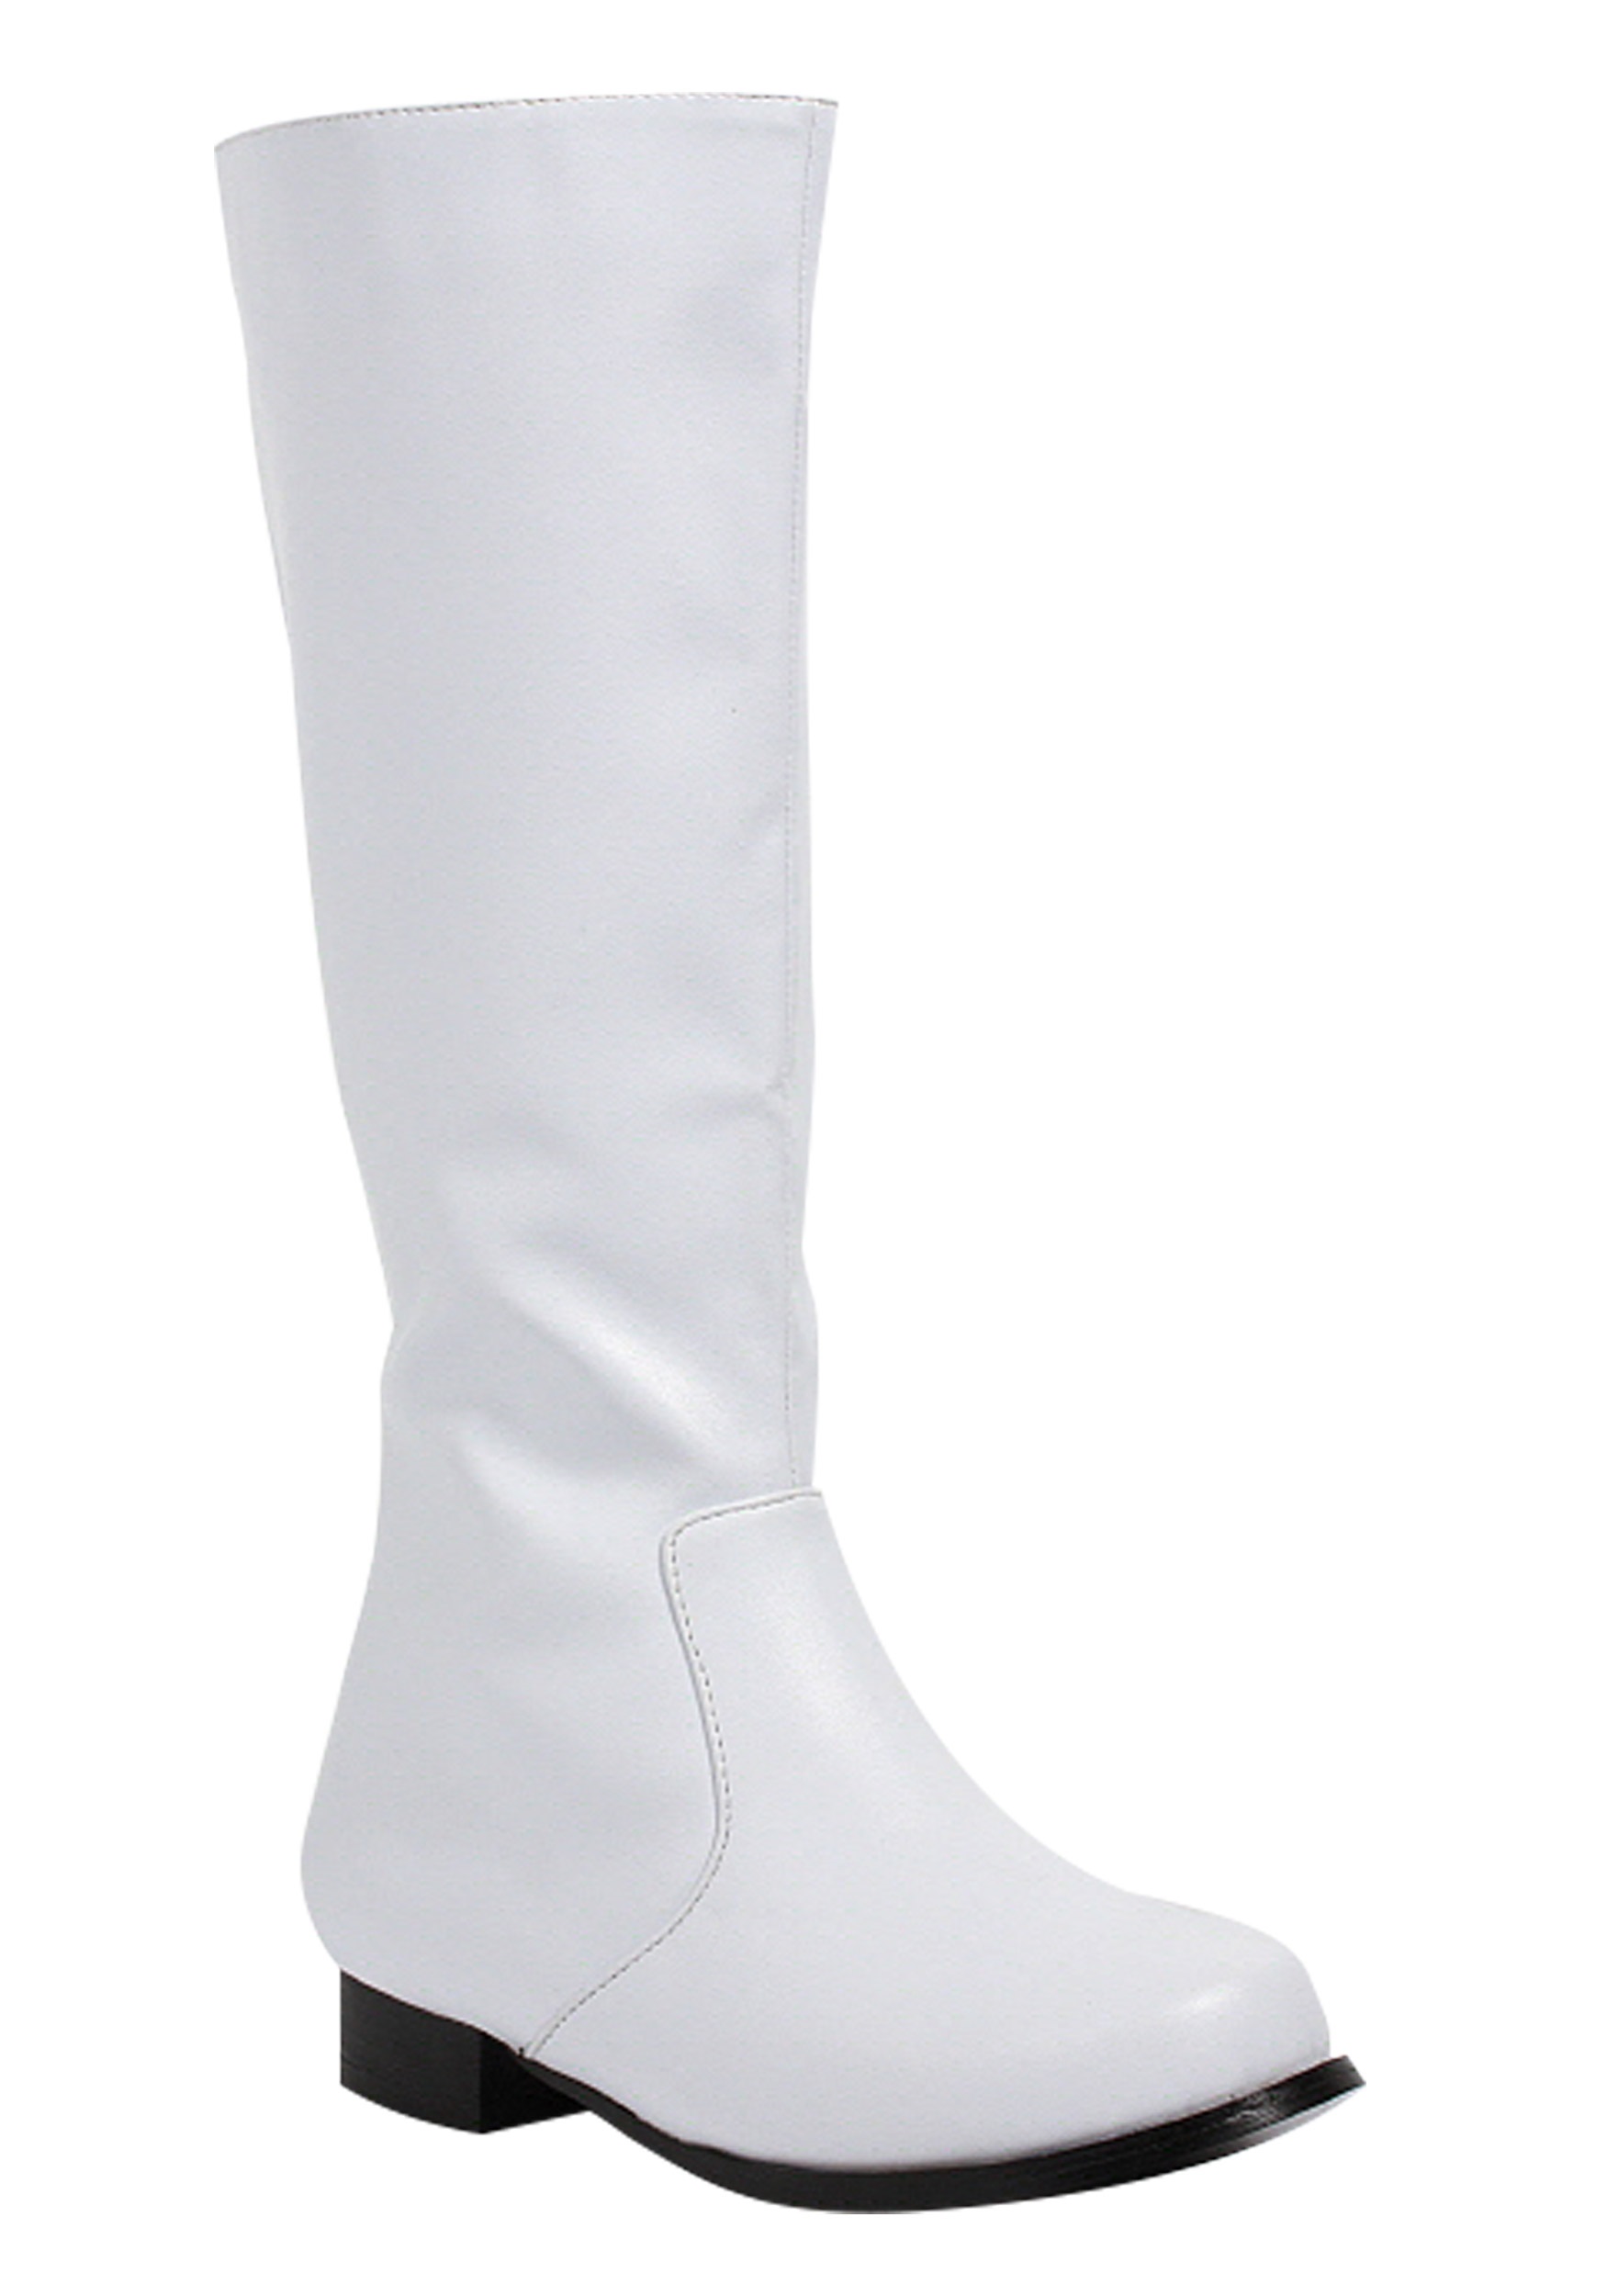 Boys Costume Boots in White